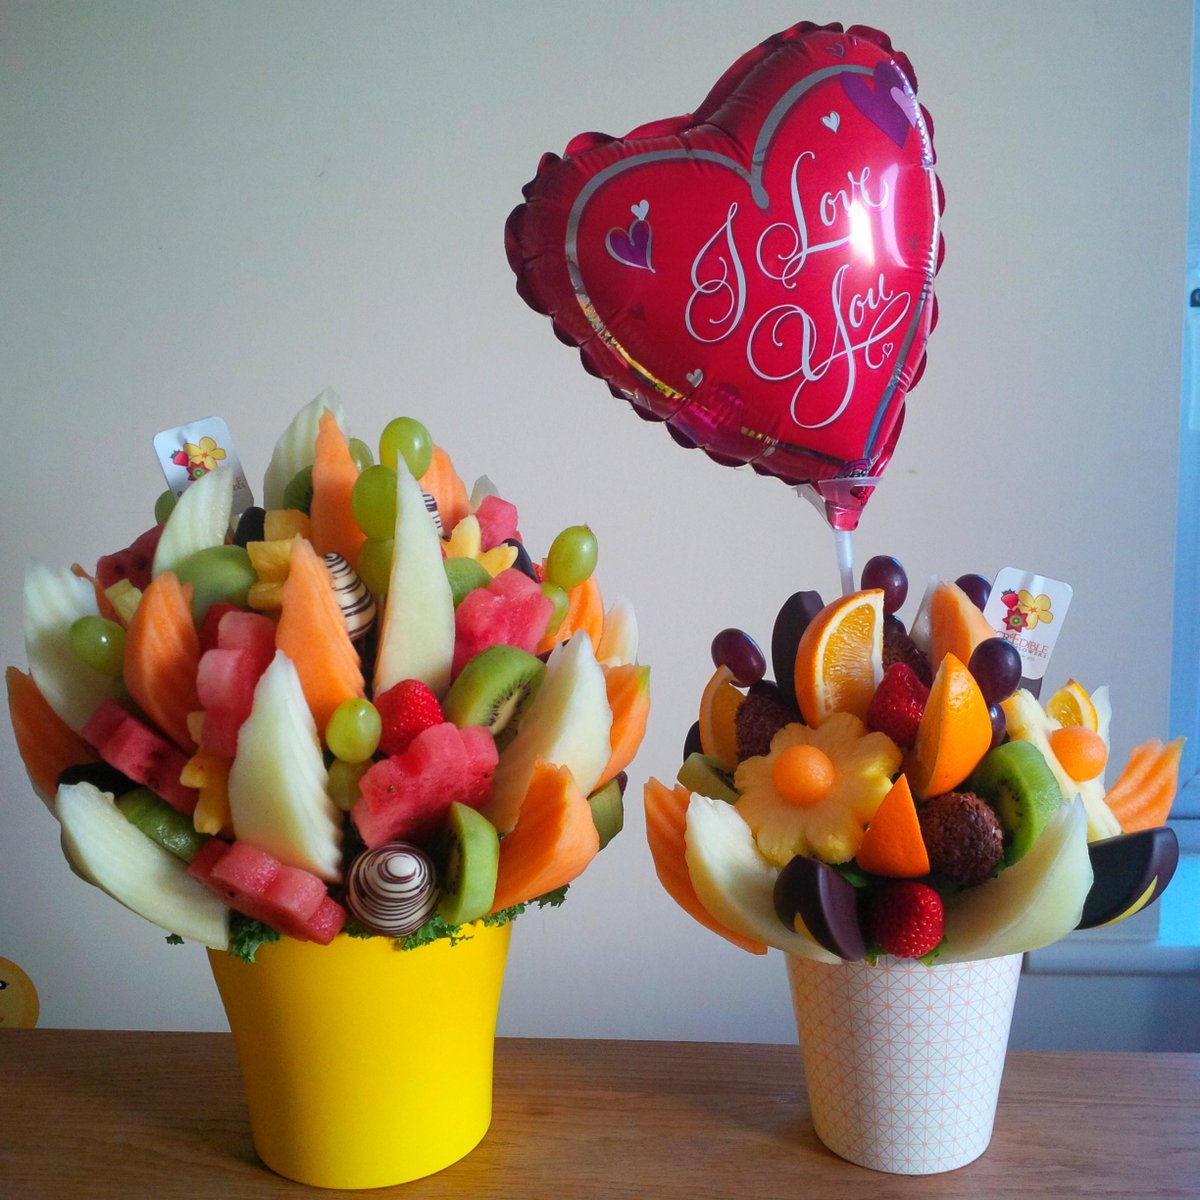 20 Inspiration Edible Arrangements Small Size Vs Large Pink Wool